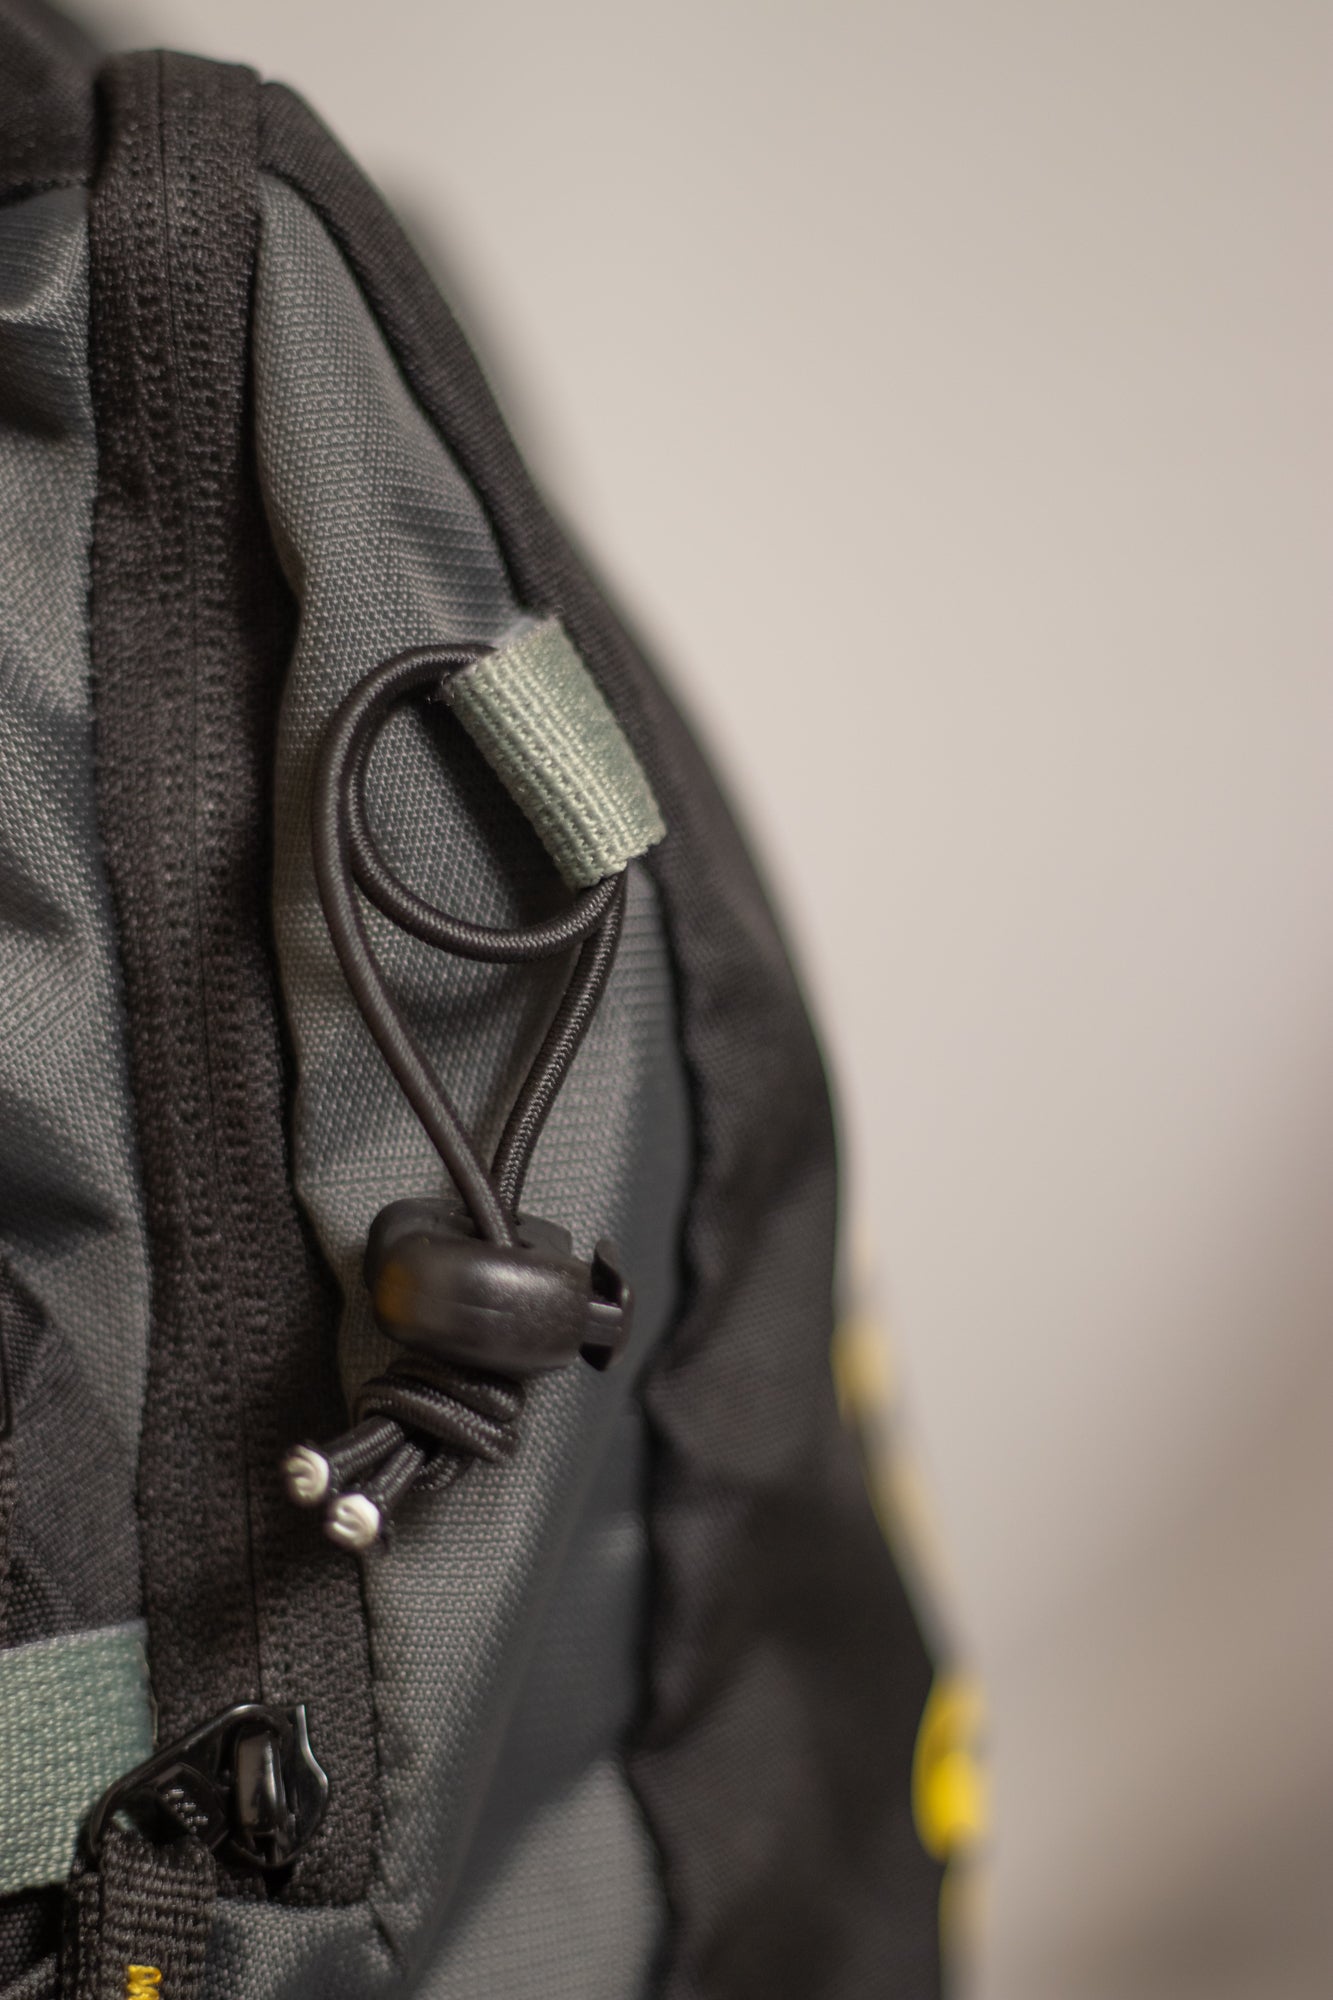 30L Trekking Backpack: Ideal for daily use and short treks